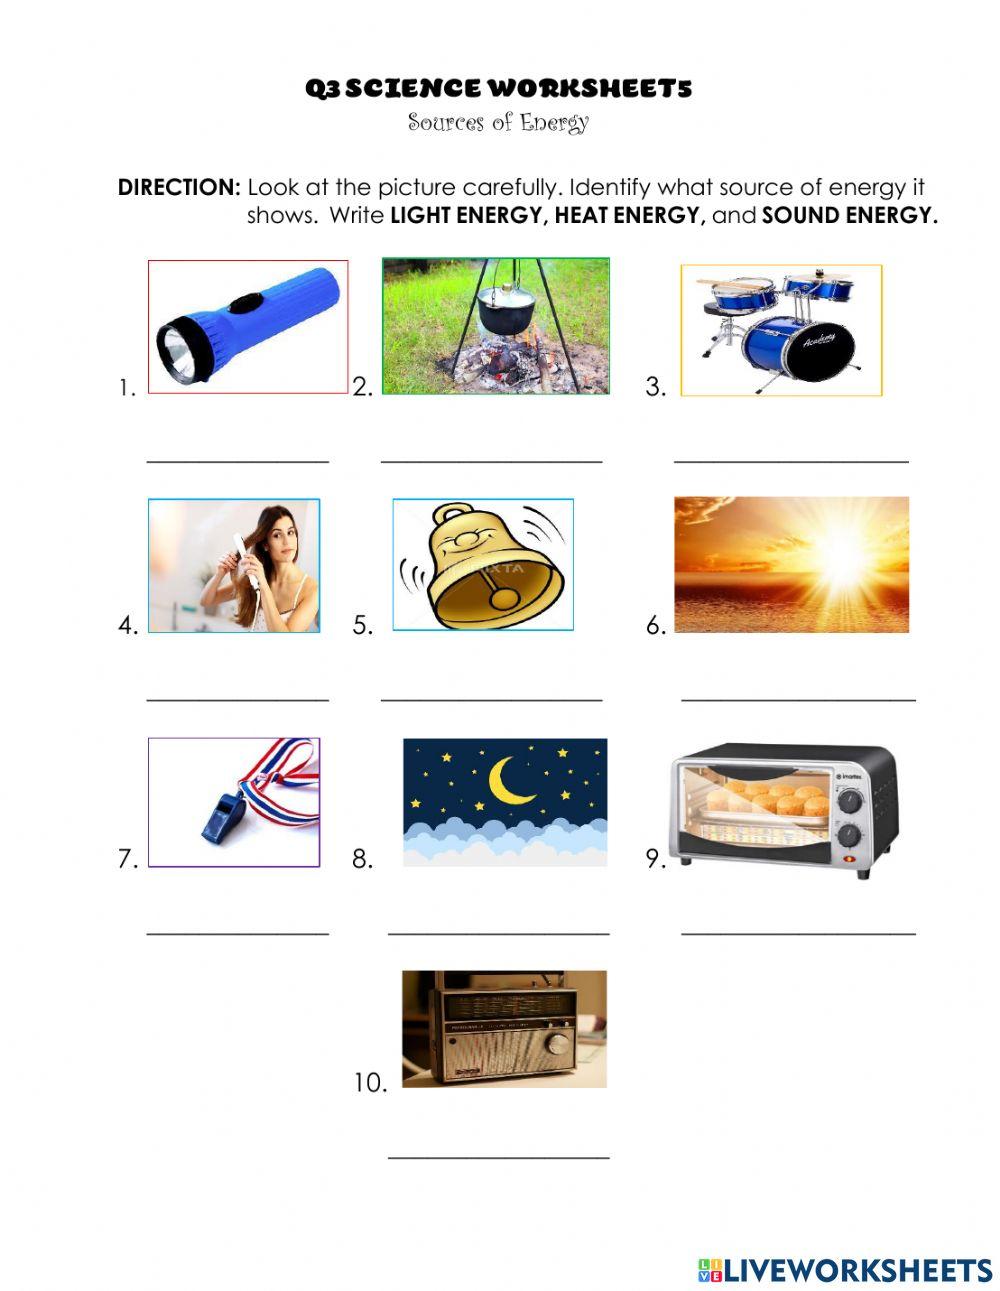 Q3 Science 4 Worksheet 5 Sources of Energy